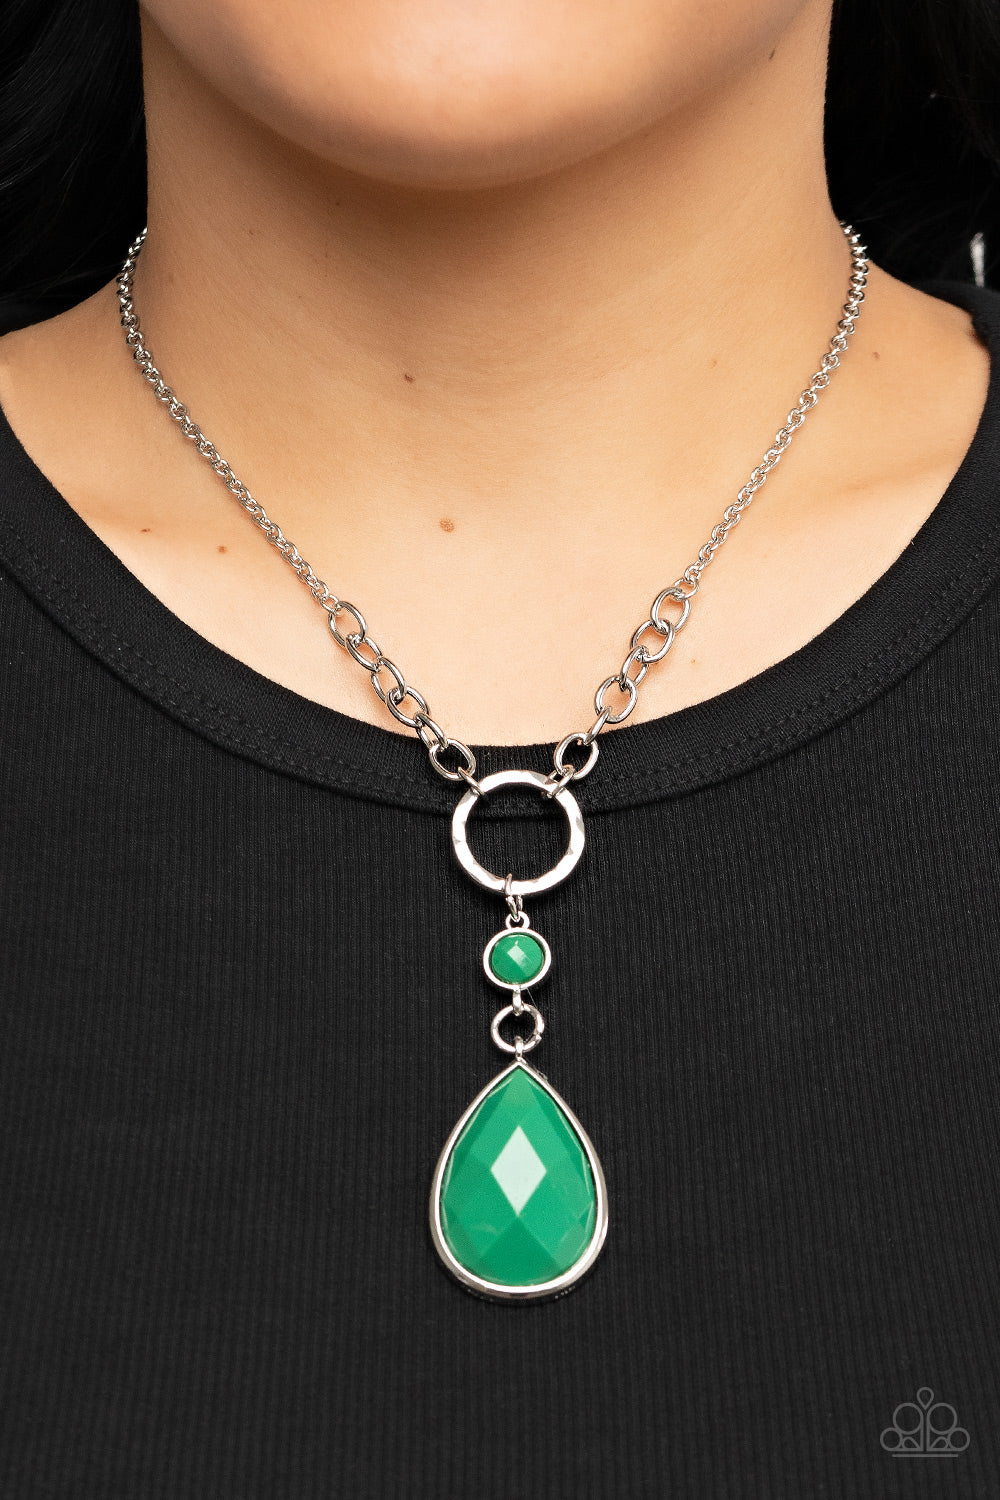 Paparazzi Necklaces - Valley Girl Glamour - Green